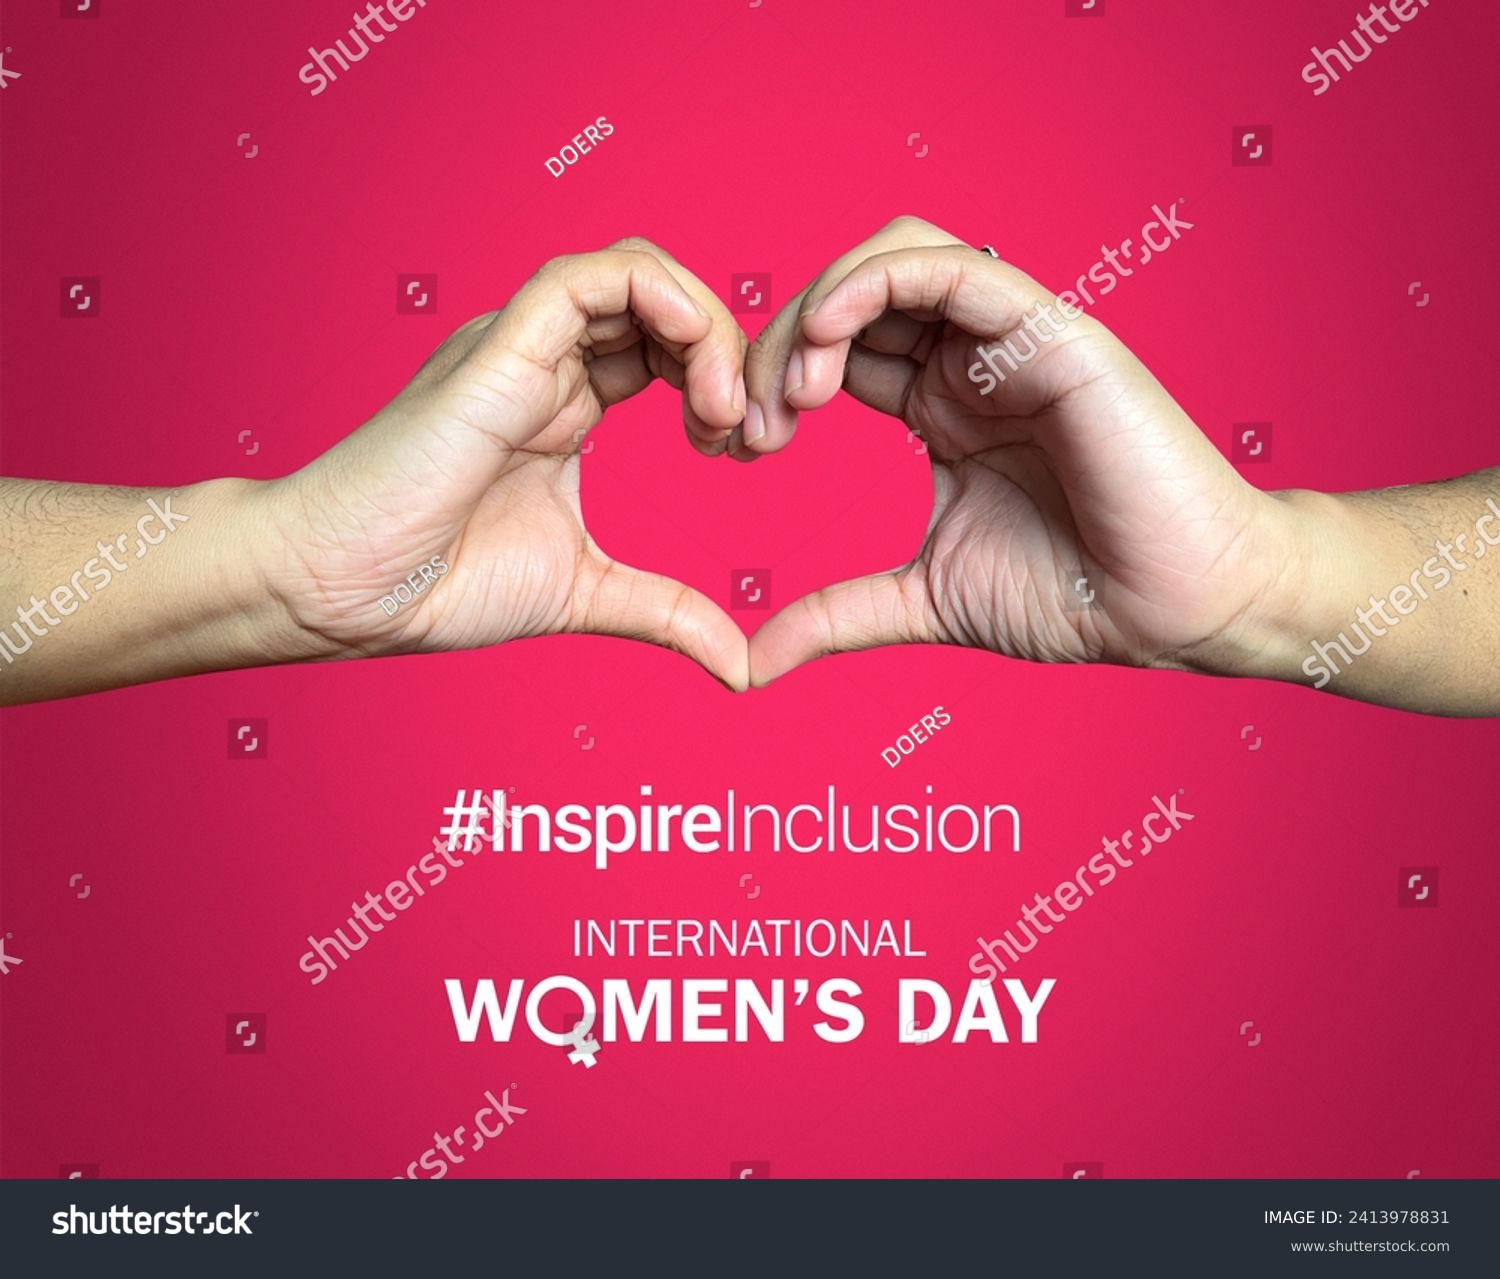 International women's day concept poster. Woman sign illustration background. 2024 women's day campaign theme- #InspireInclusion #2413978831